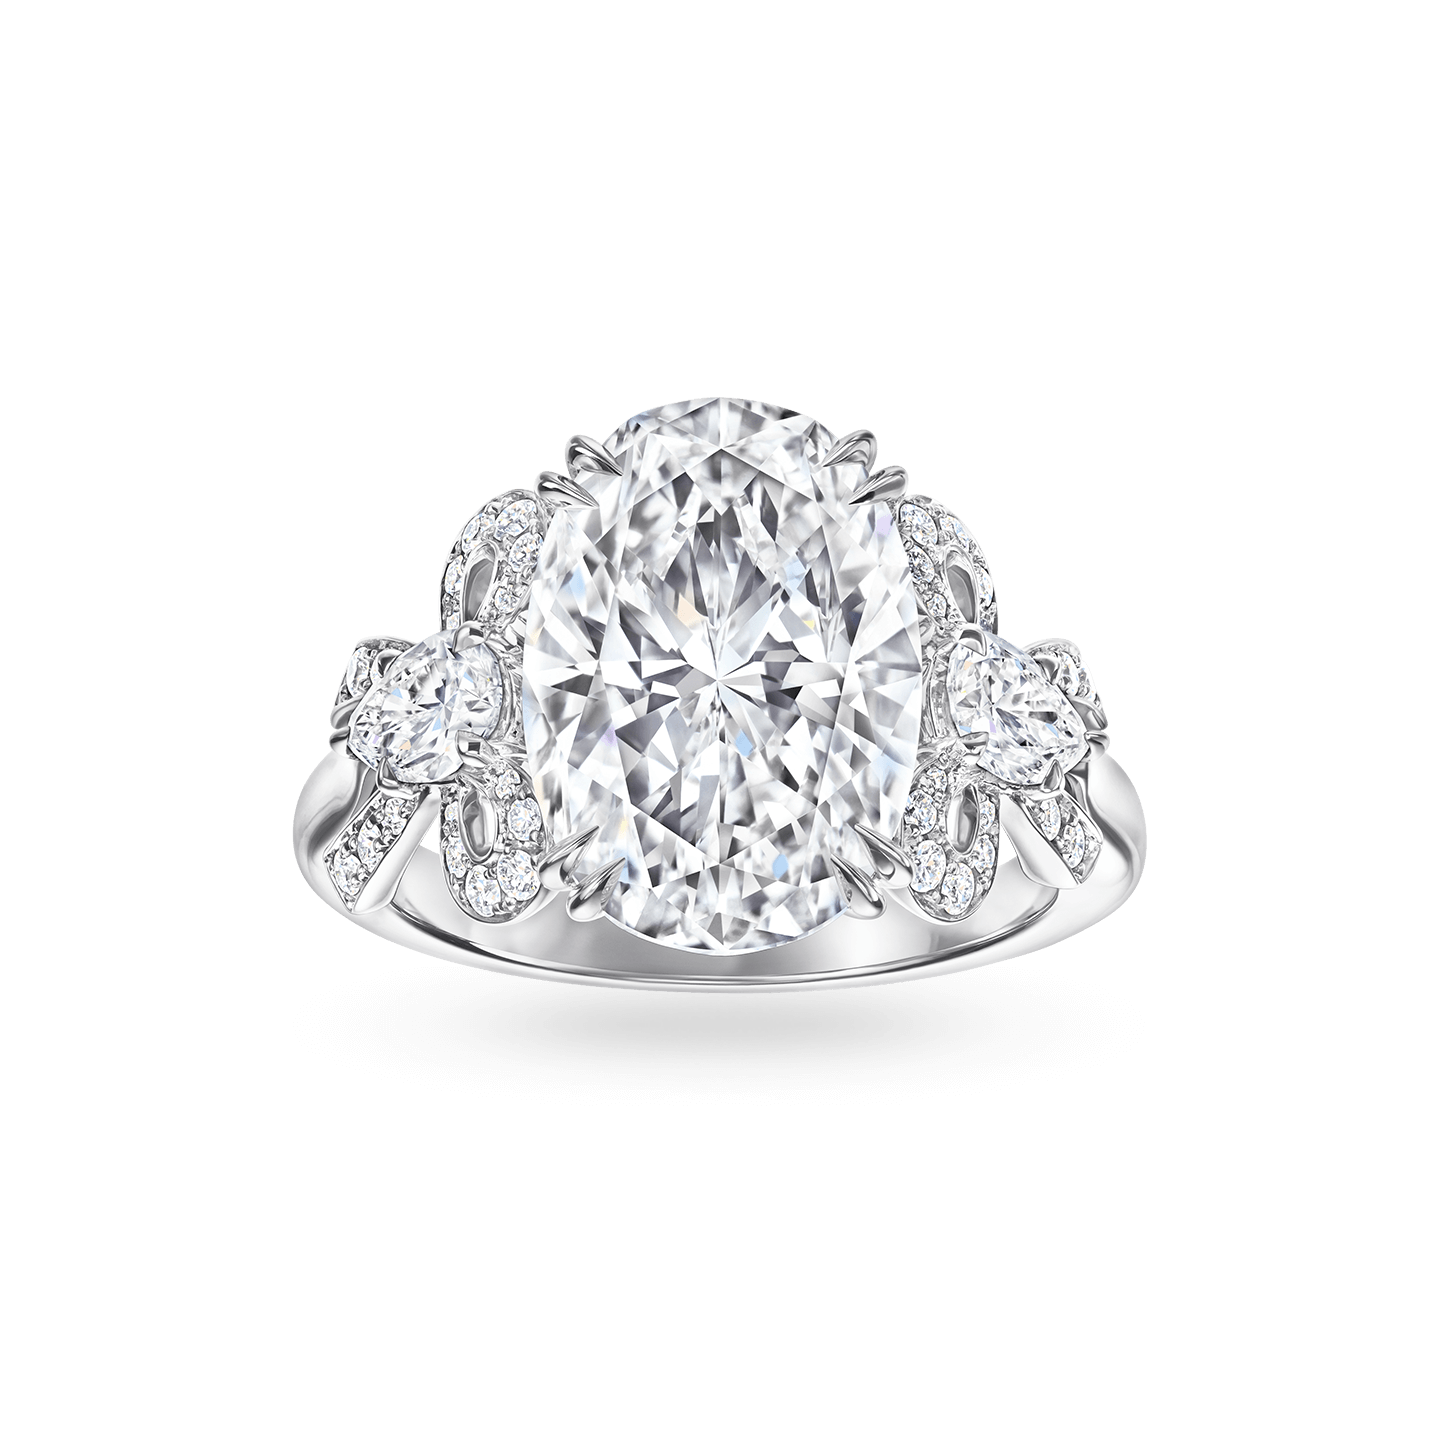 Front view of the Bridal Couture Oval-Shaped Diamond Engagement Ring